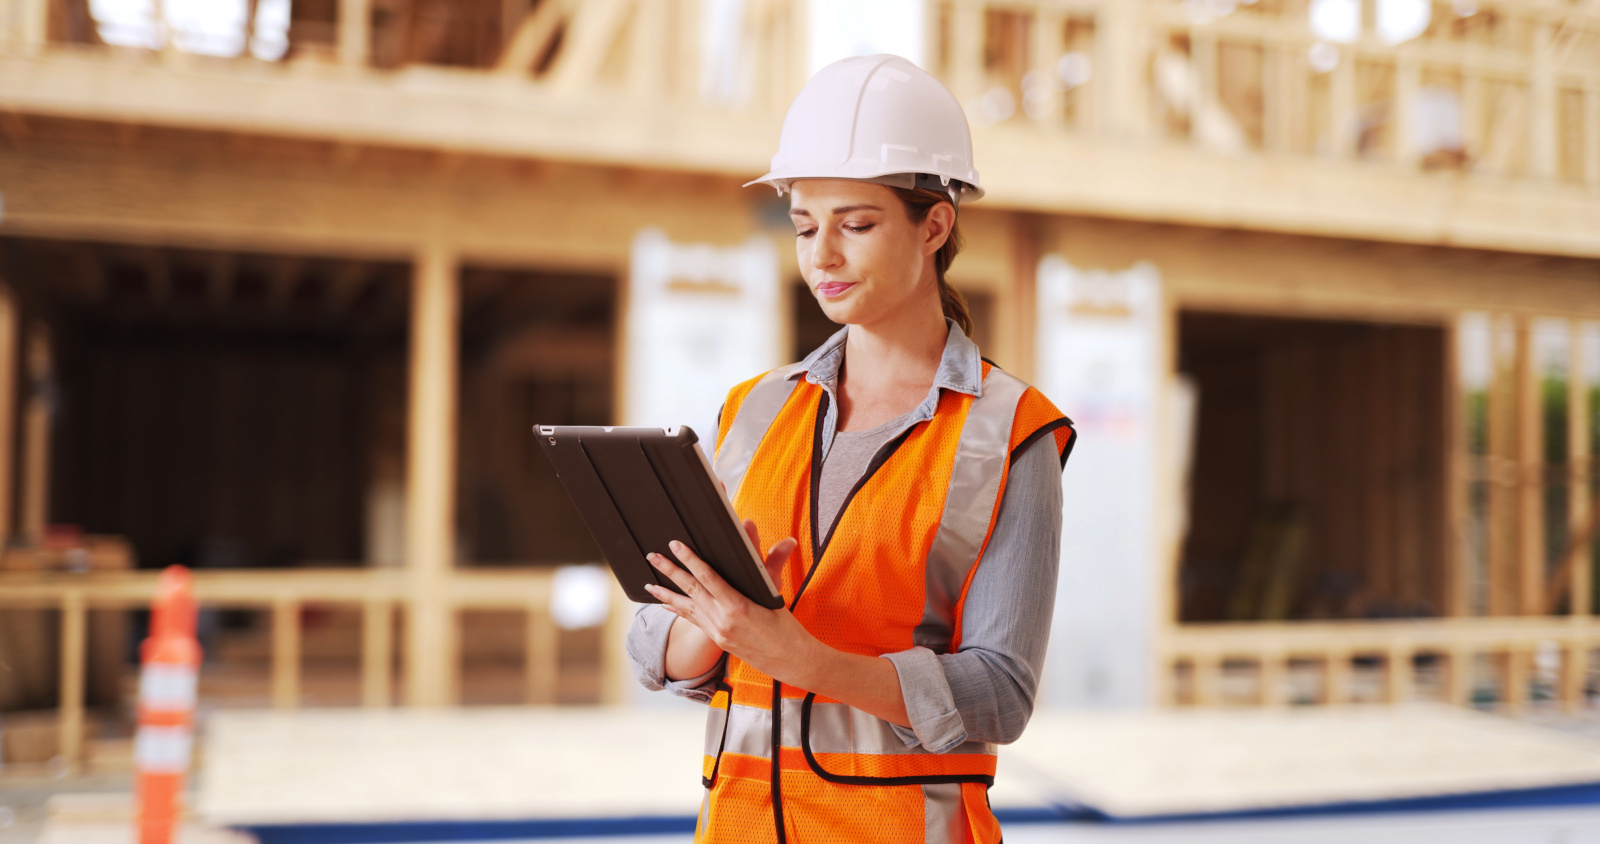 Female Quality Control inspector on construction site using the NestForms mobile form app